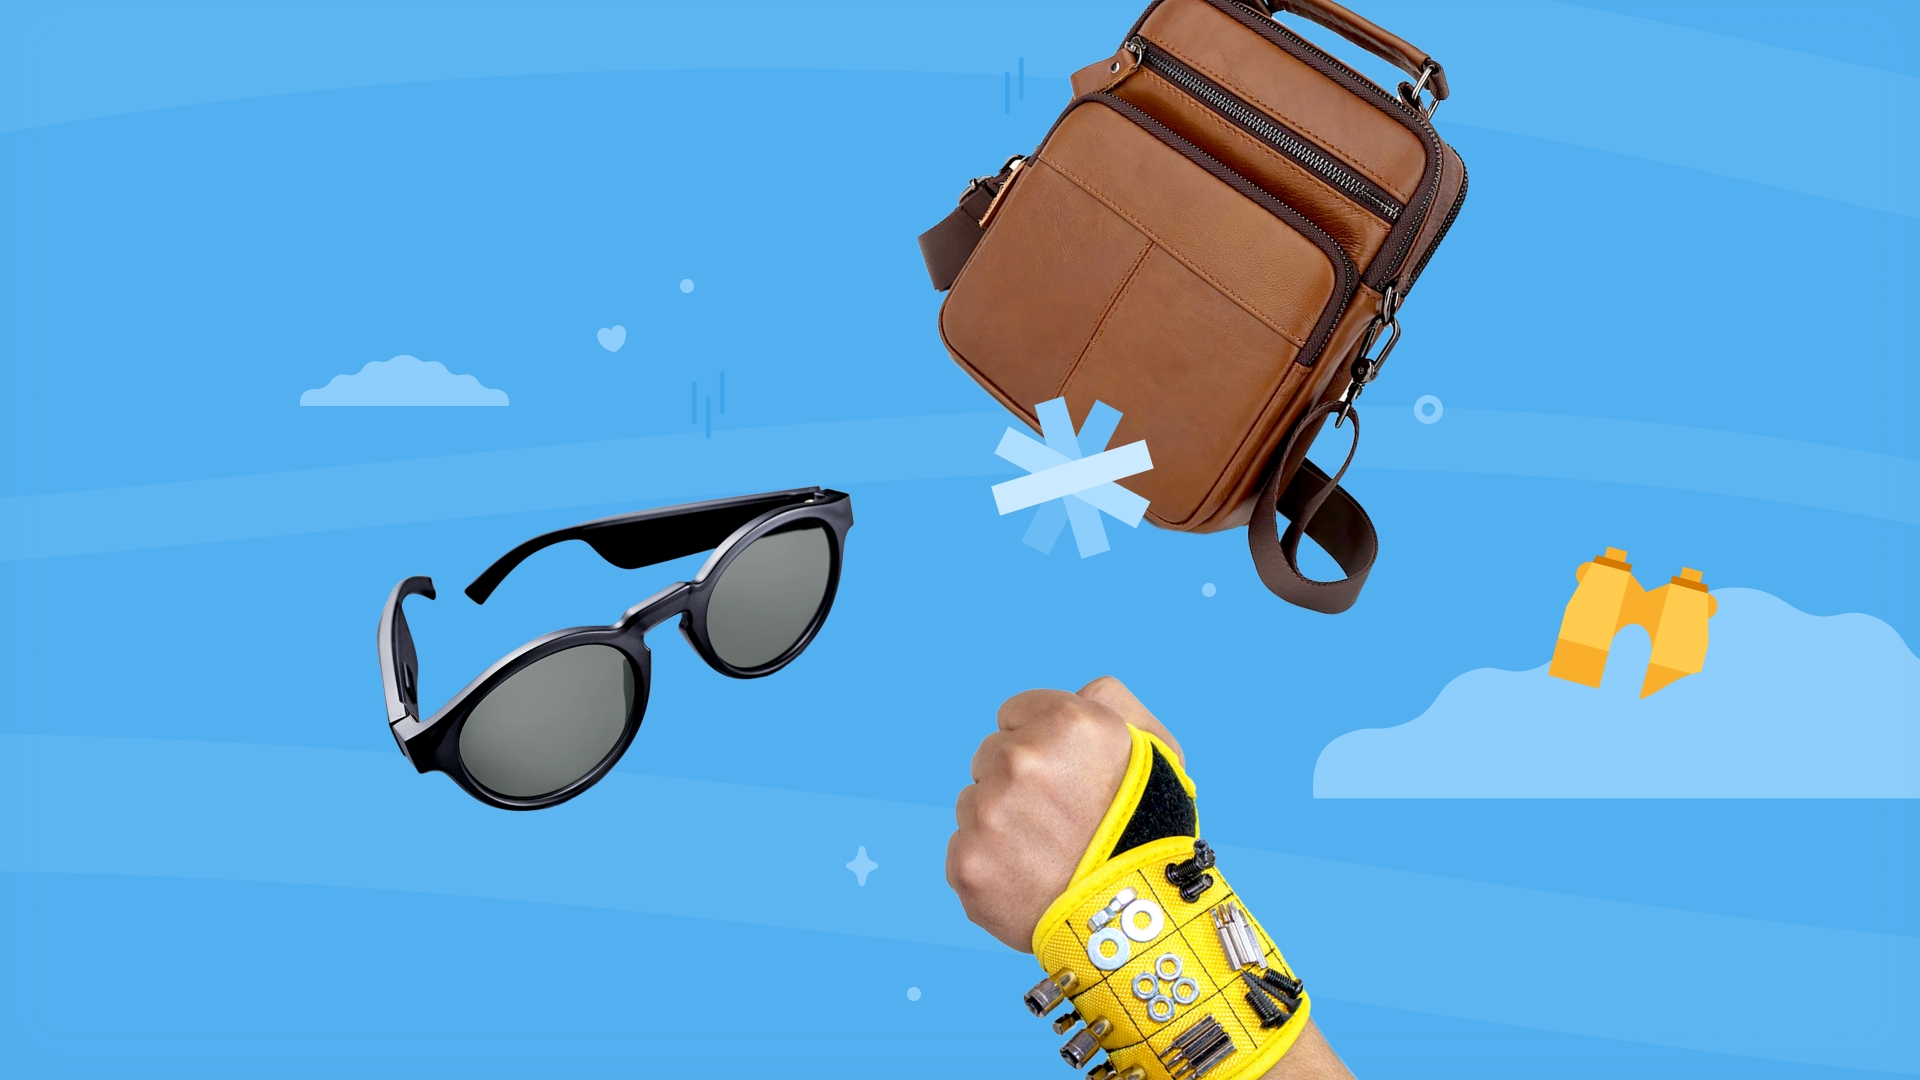 A selection of on-the-go gifts including Bose audio sunglasses, a leather satchel and a magnetic wristband.